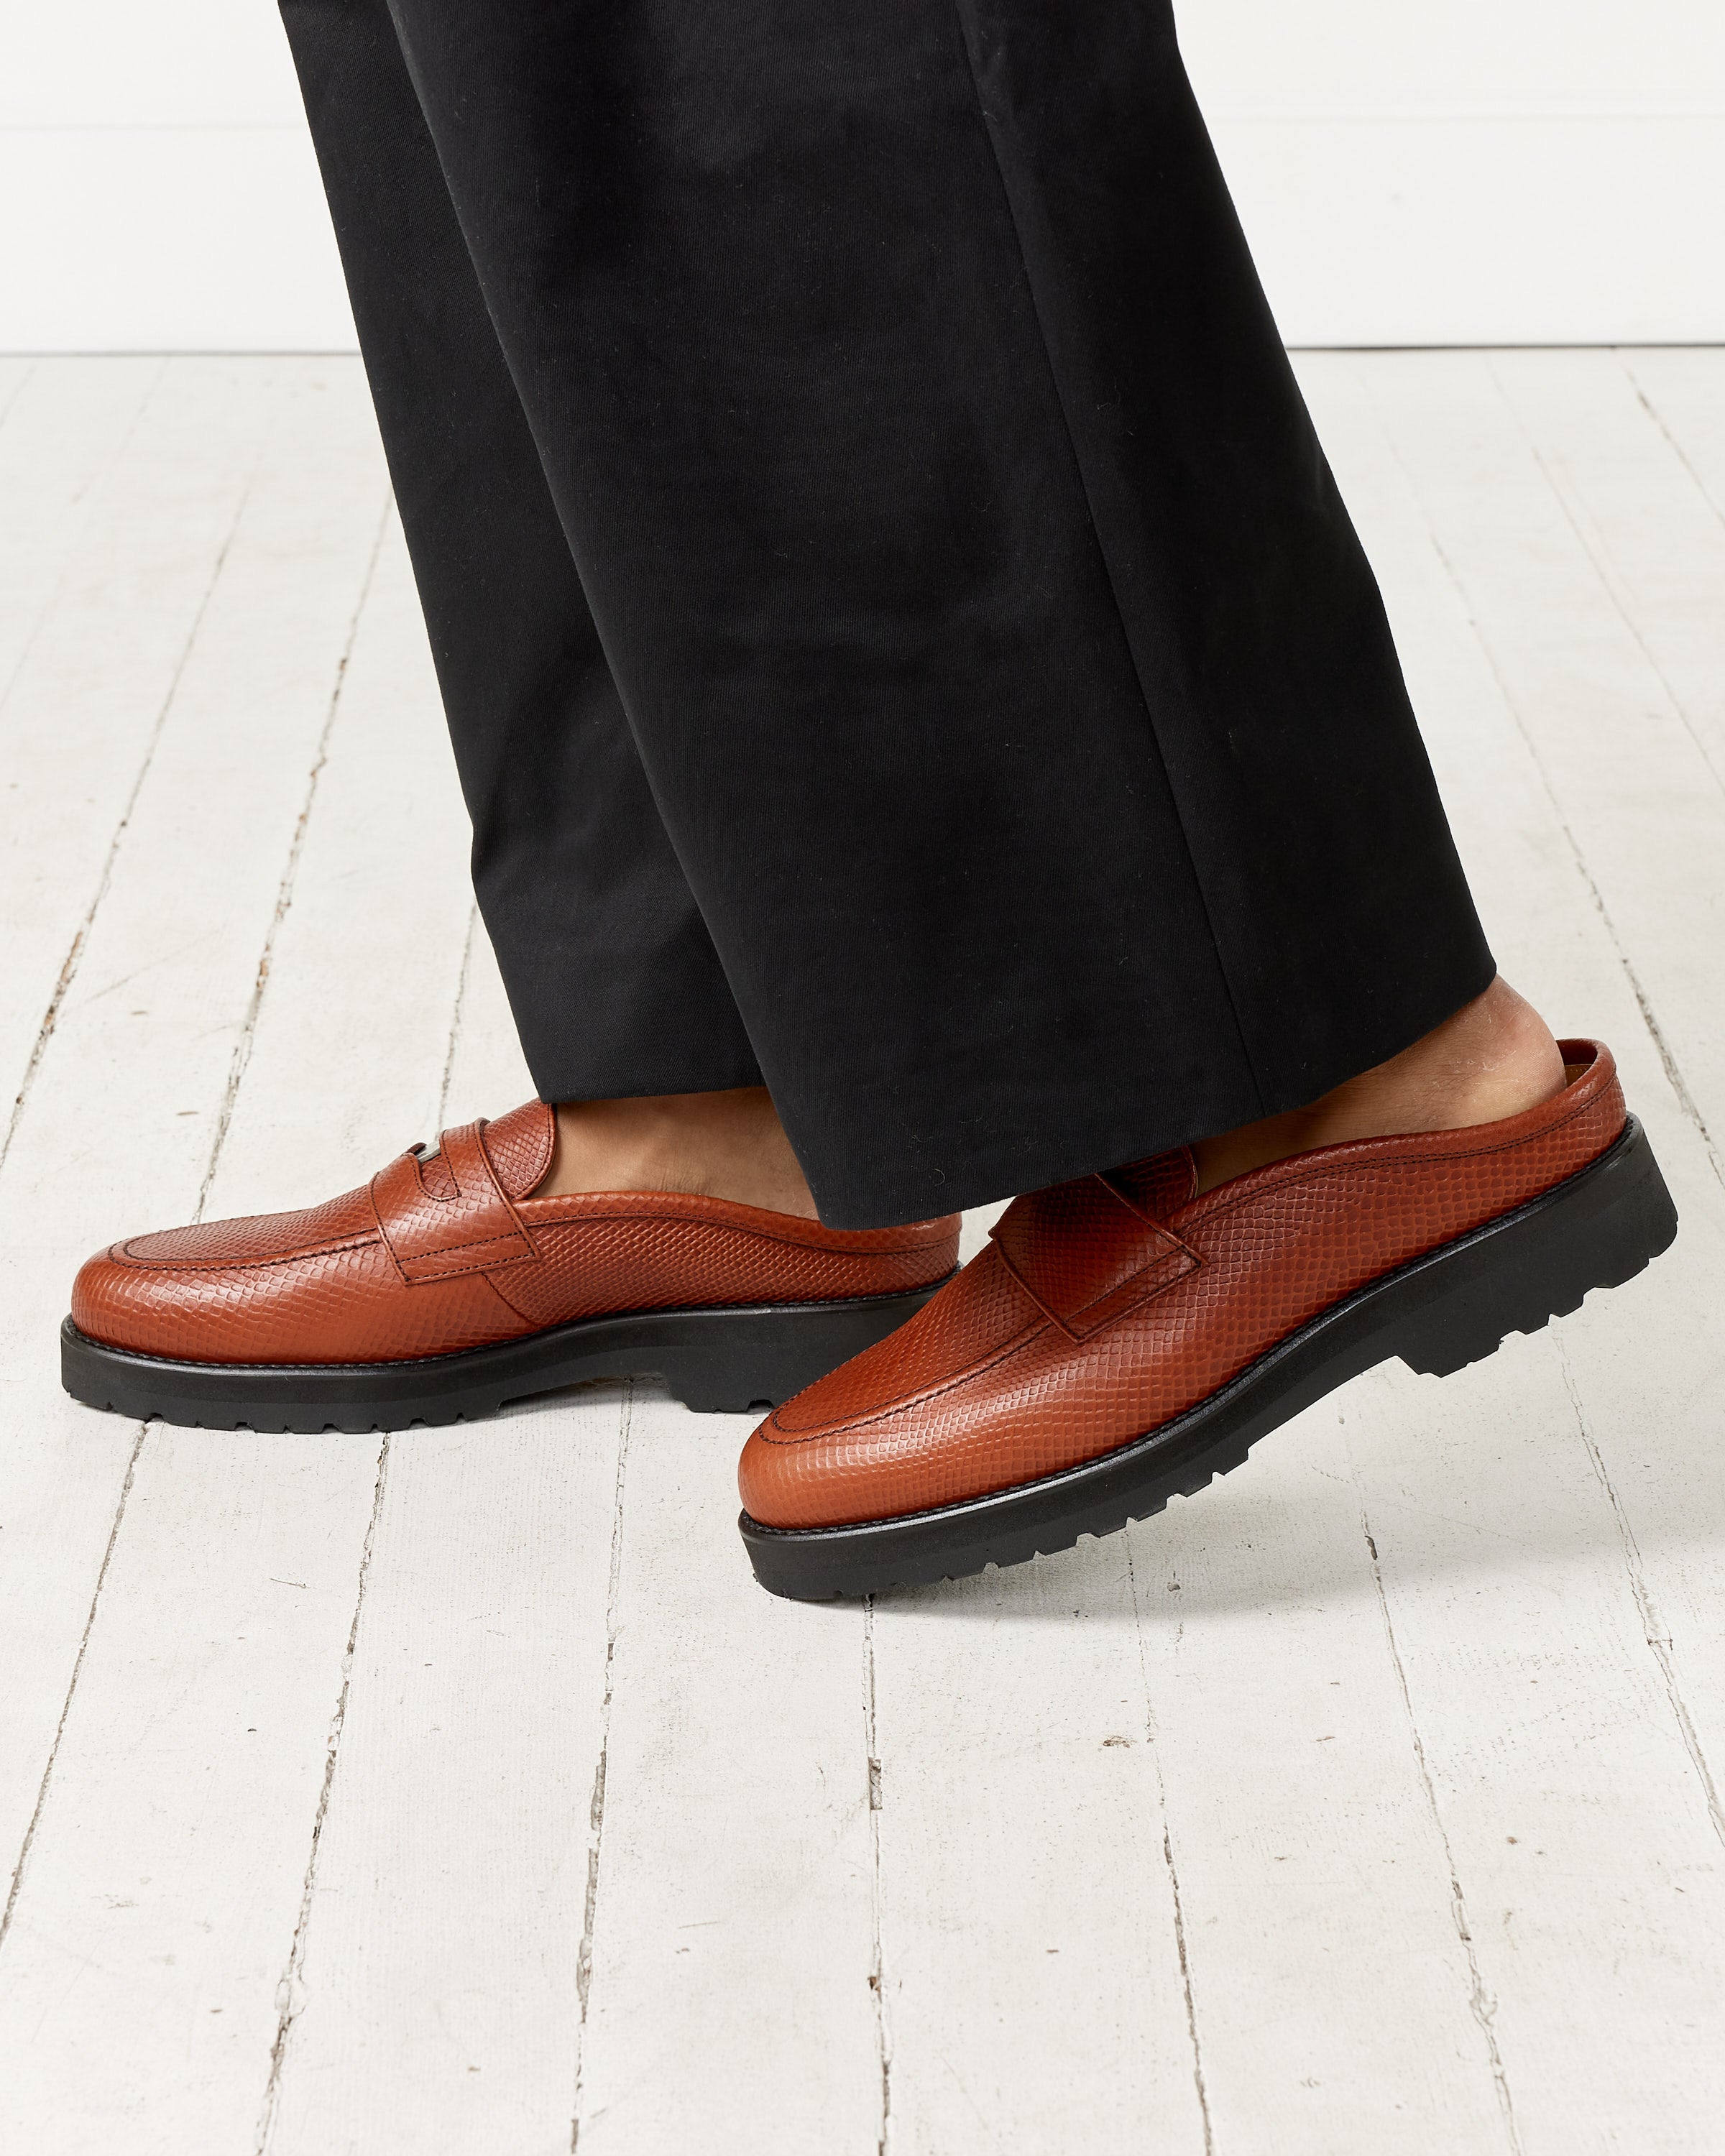 Coin Loafer Mule in Brown